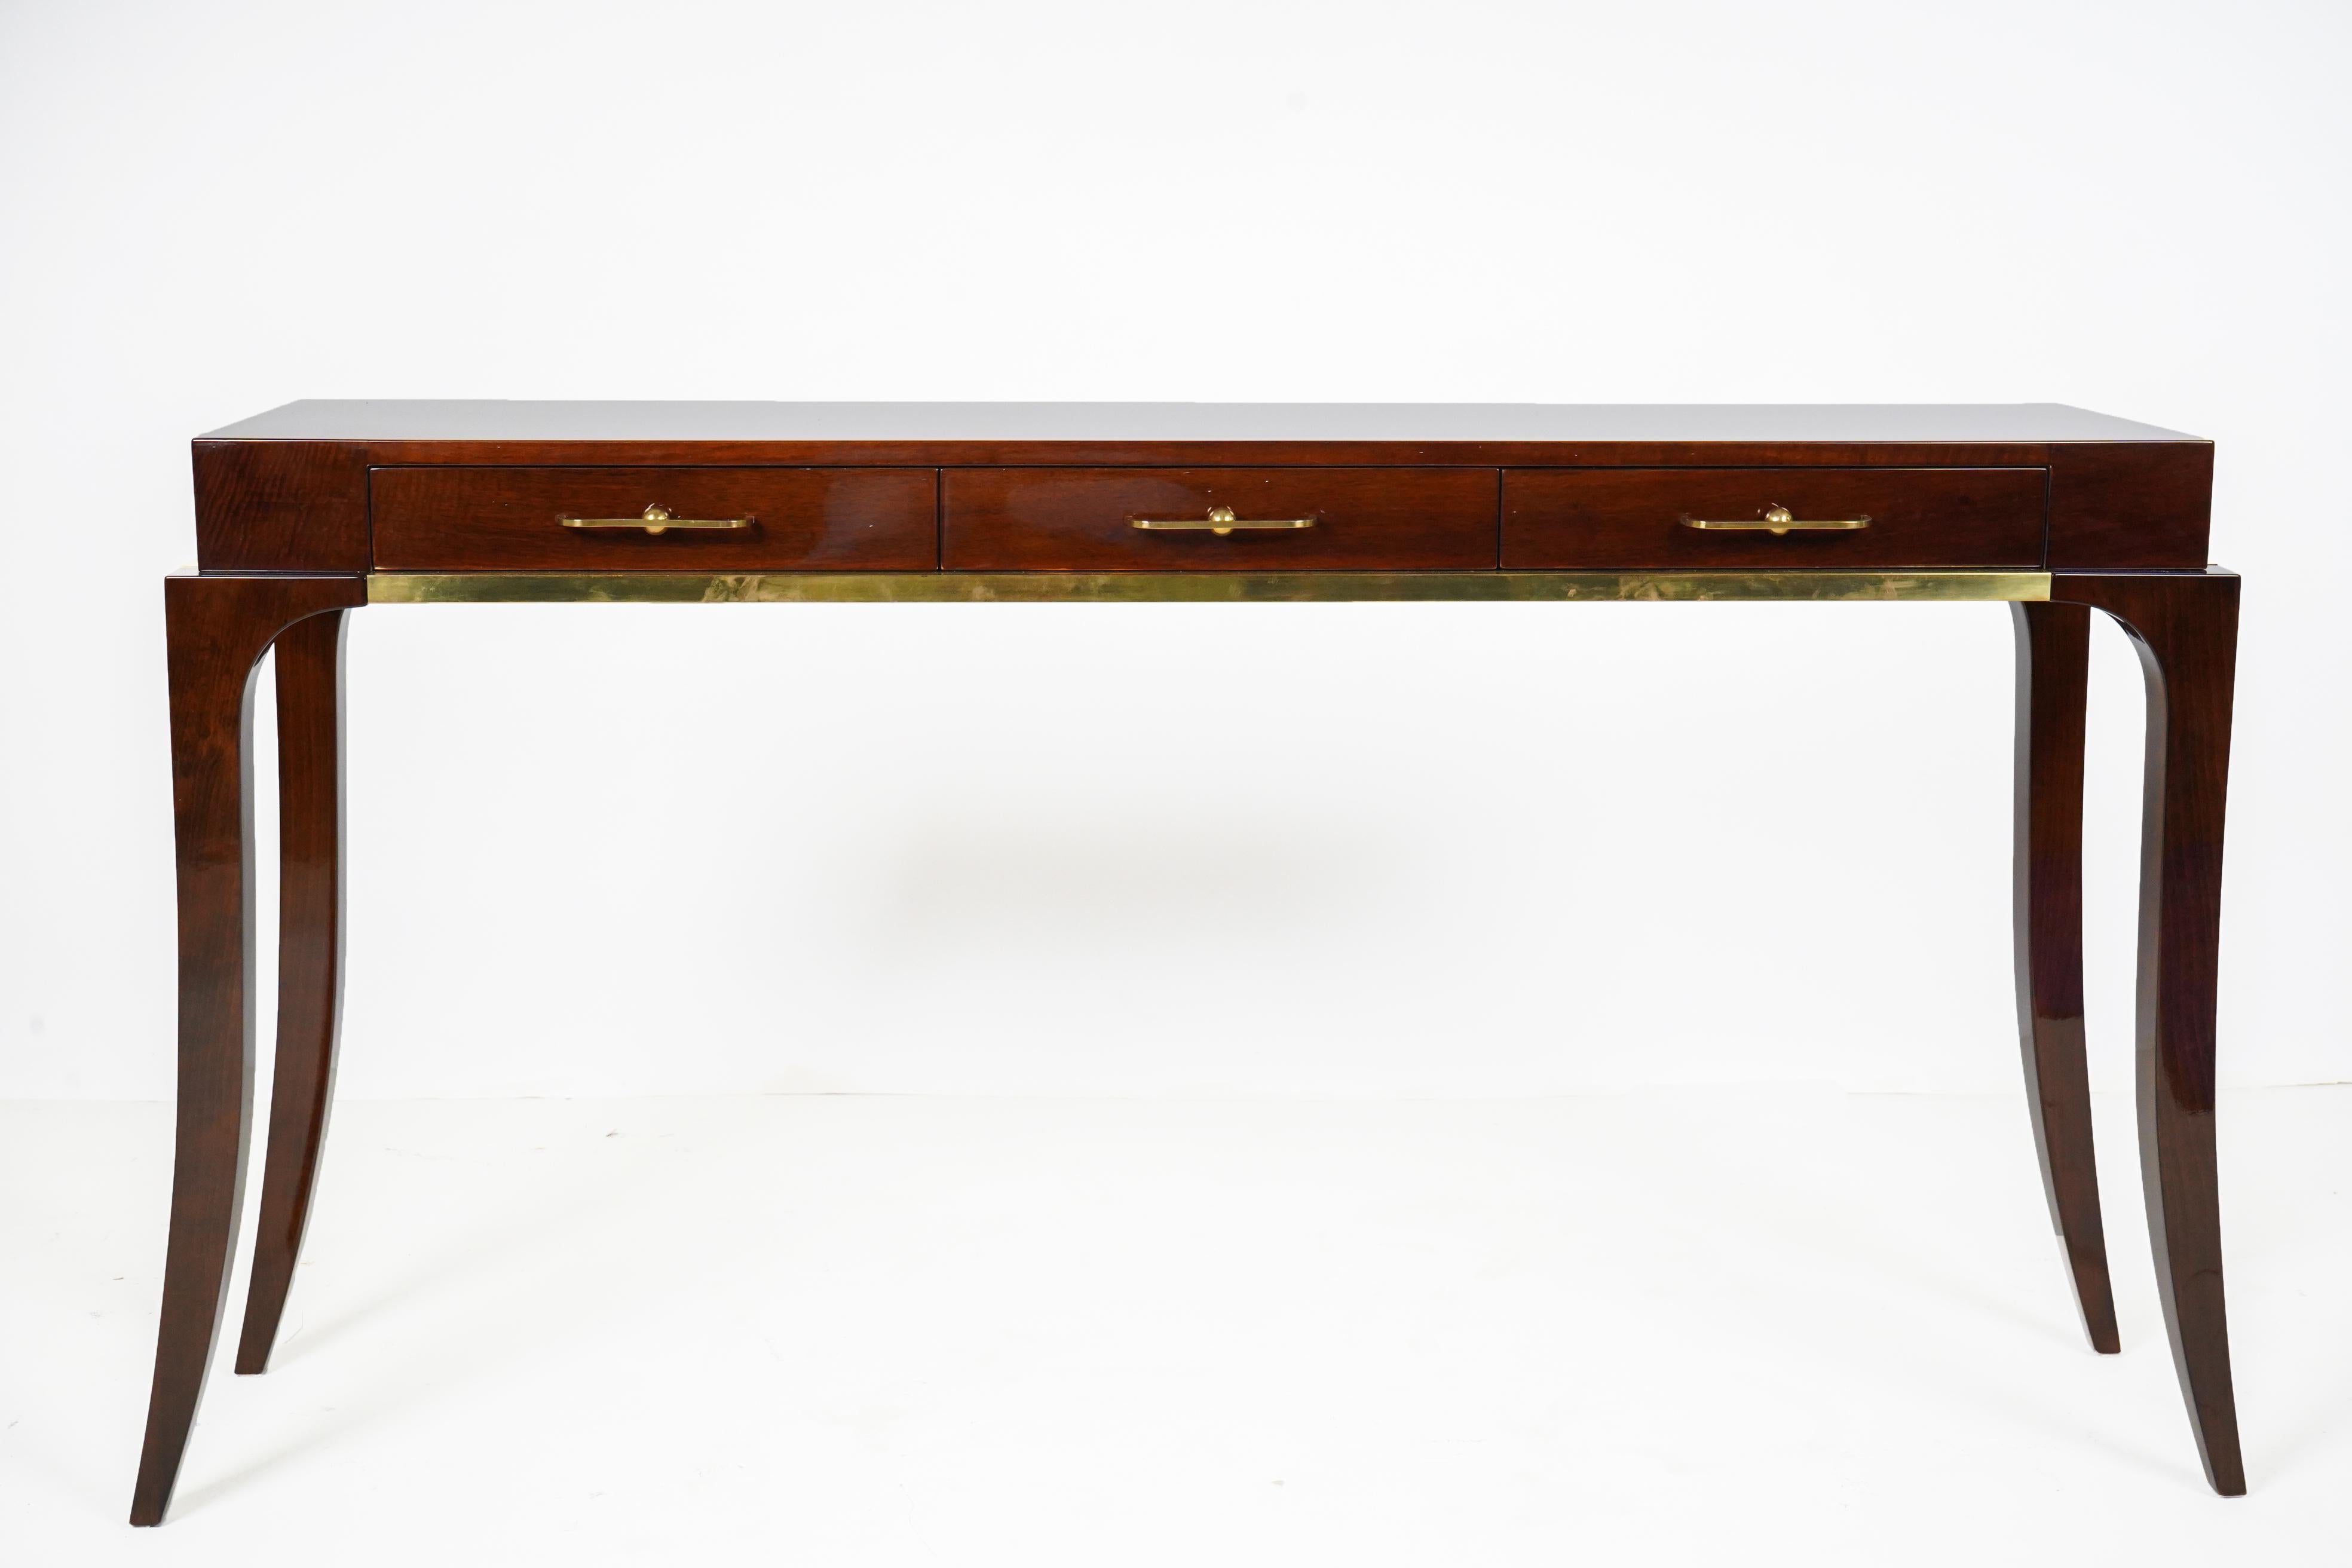 This Art Deco style console is based on vintage Hungarian designs from the 1930's. It is made from walnut veneers, solid walnut legs and solid brass handles and trim. The glossy finish is French polish. This is a particularly graceful console table,